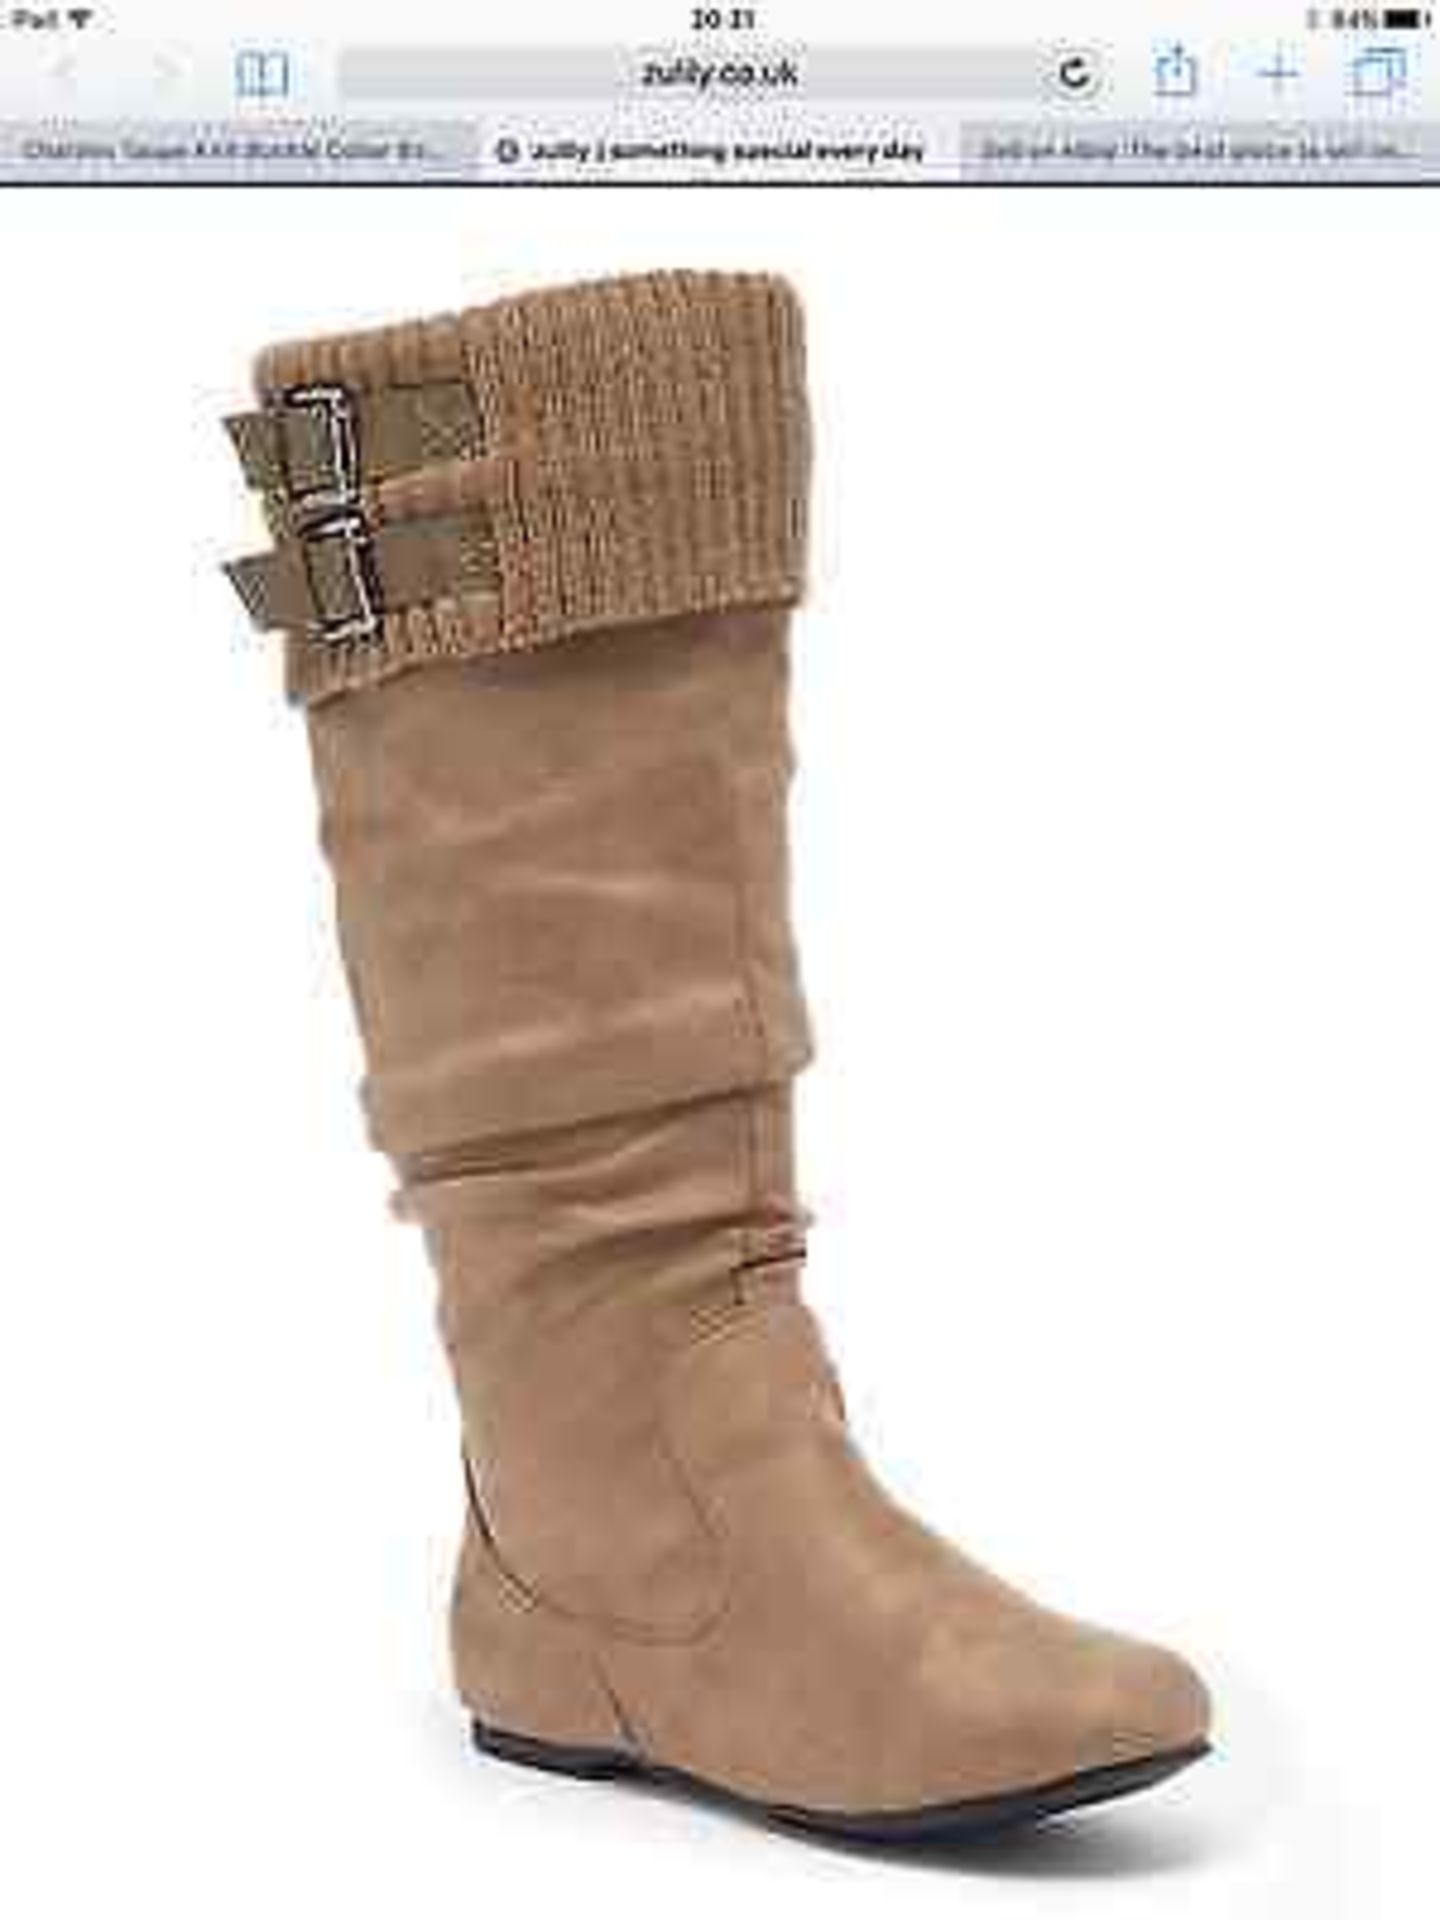 Chatties Taupe Knit Buckle Collar Boot, Size Eur 38.5 (New without box)